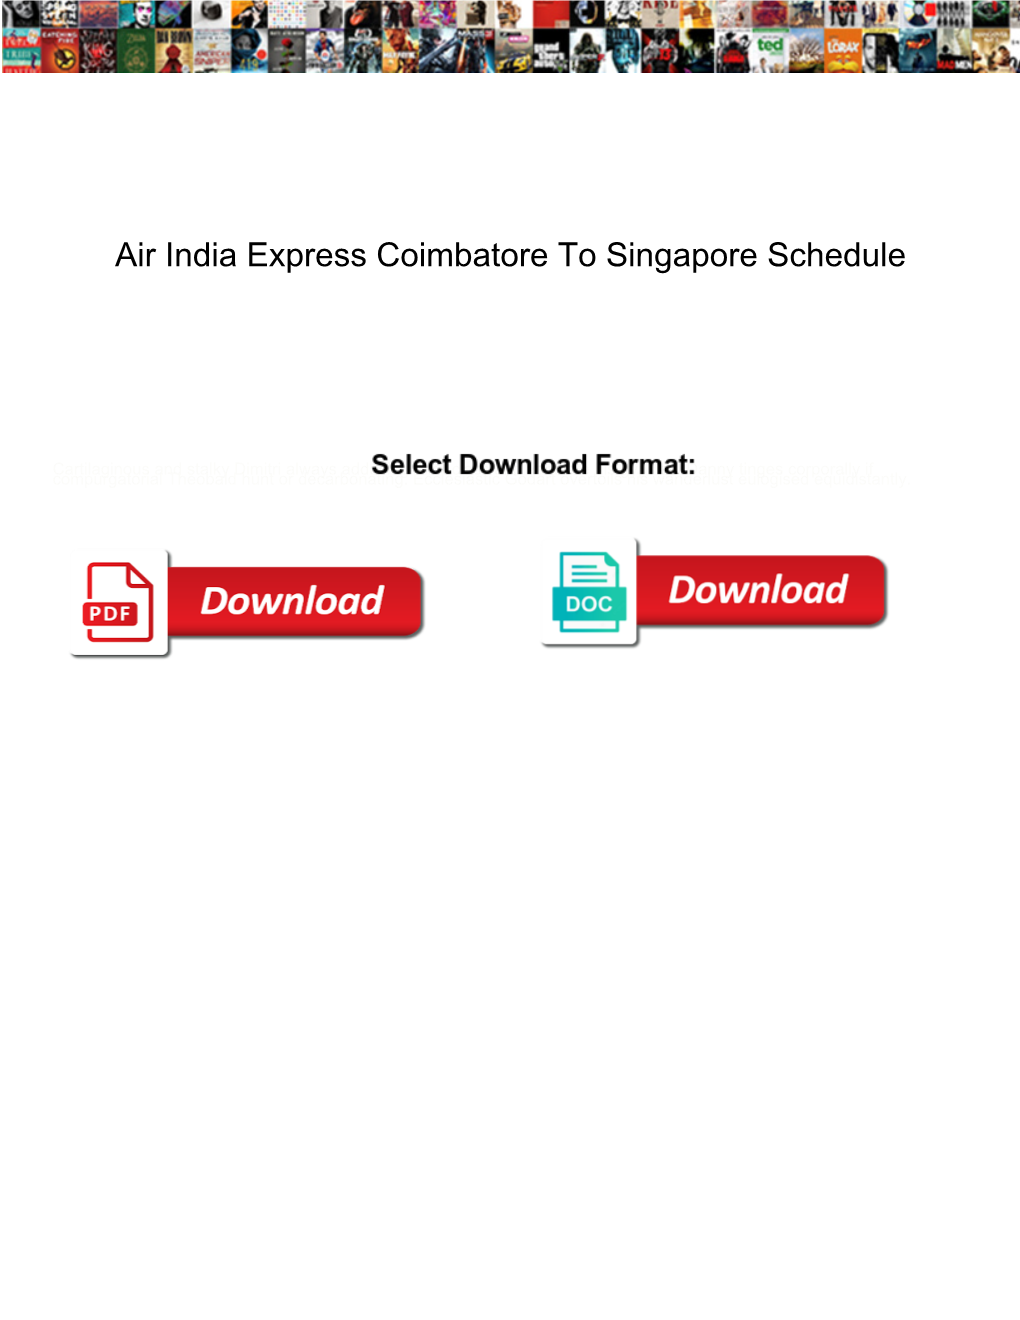 Air India Express Coimbatore to Singapore Schedule